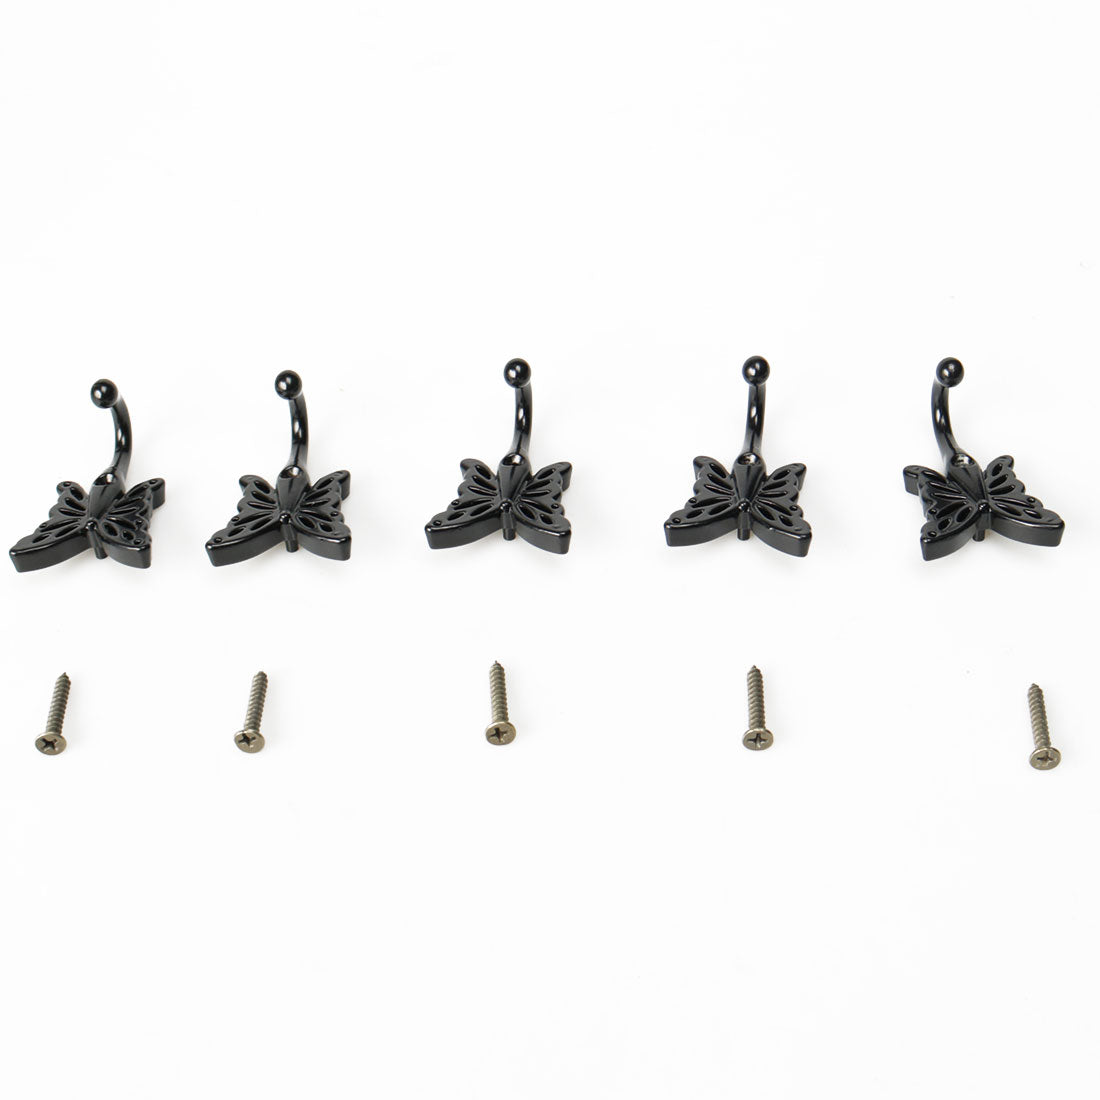 uxcell Uxcell 5pcs Robe Hooks Wall Mounted Zinc Alloy Coat Scarf DIY Hanger with Screws Black